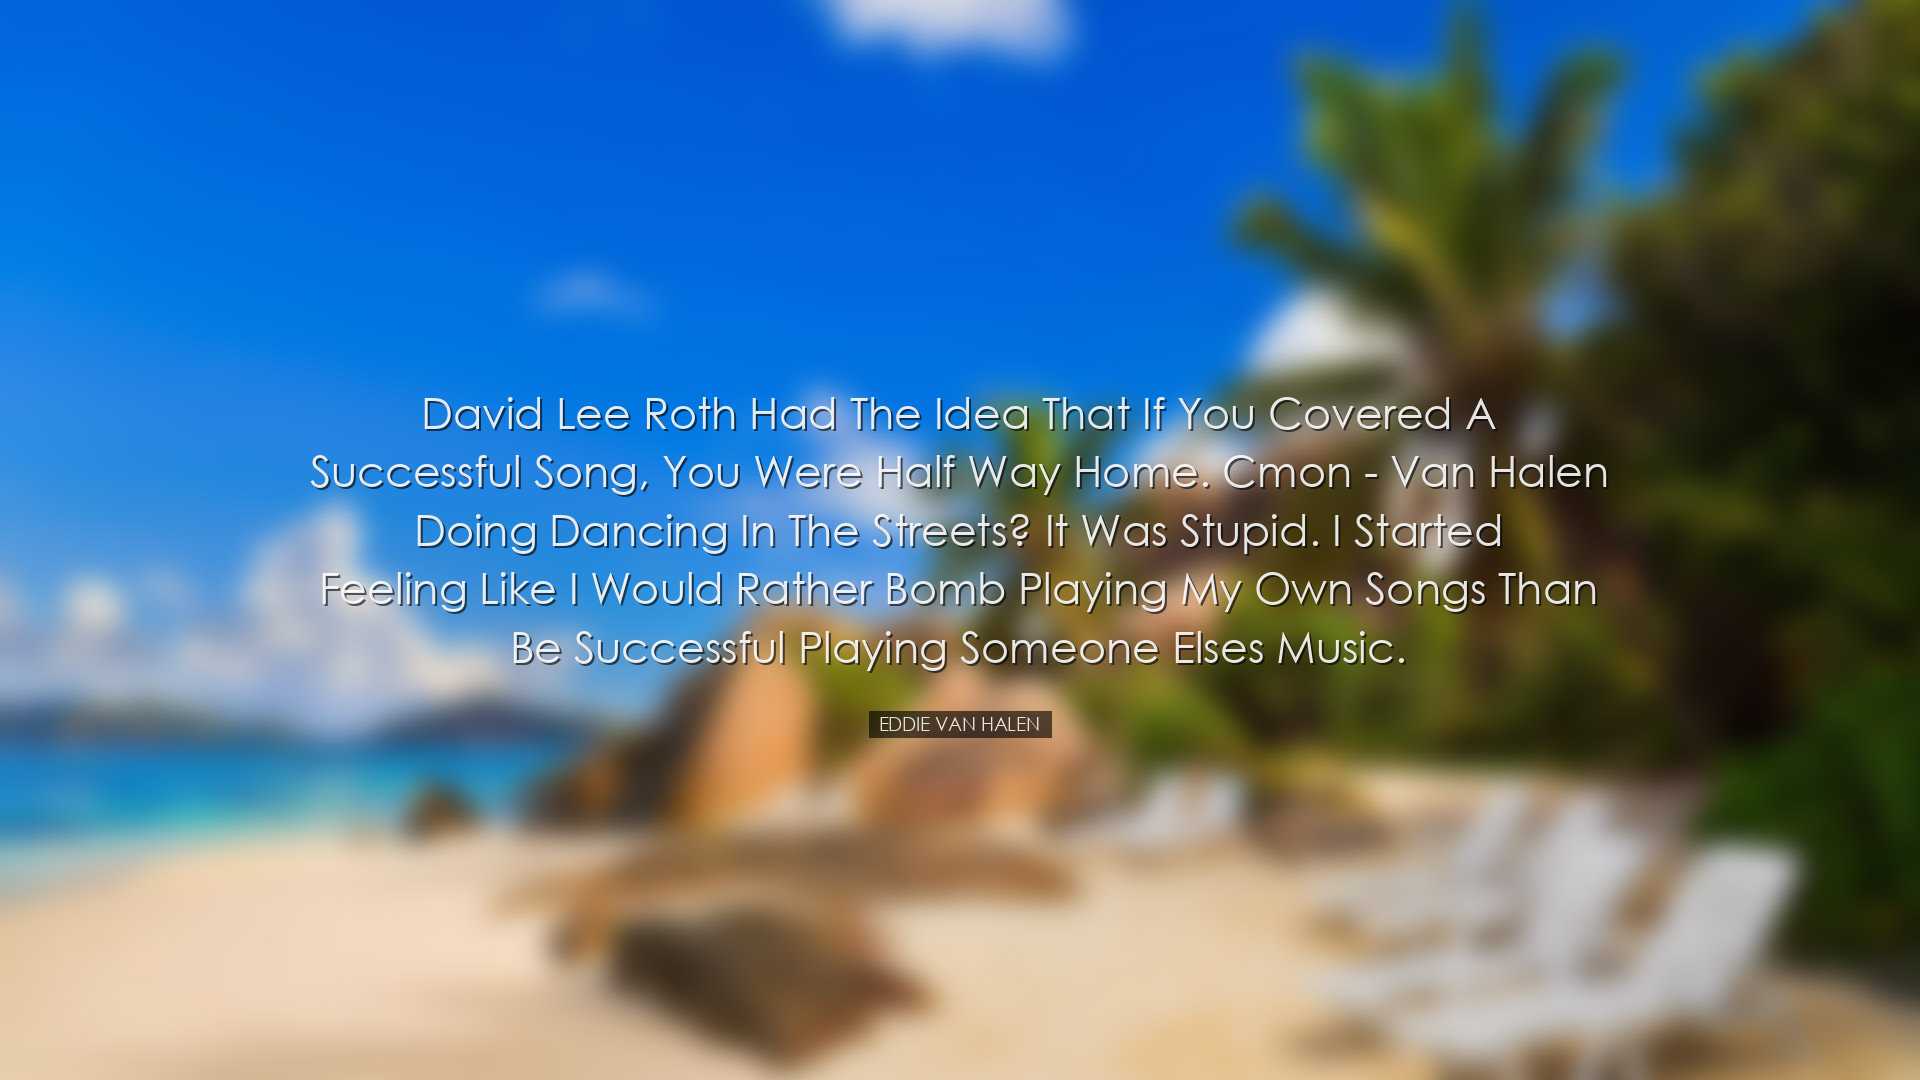 David Lee Roth had the idea that if you covered a successful song,